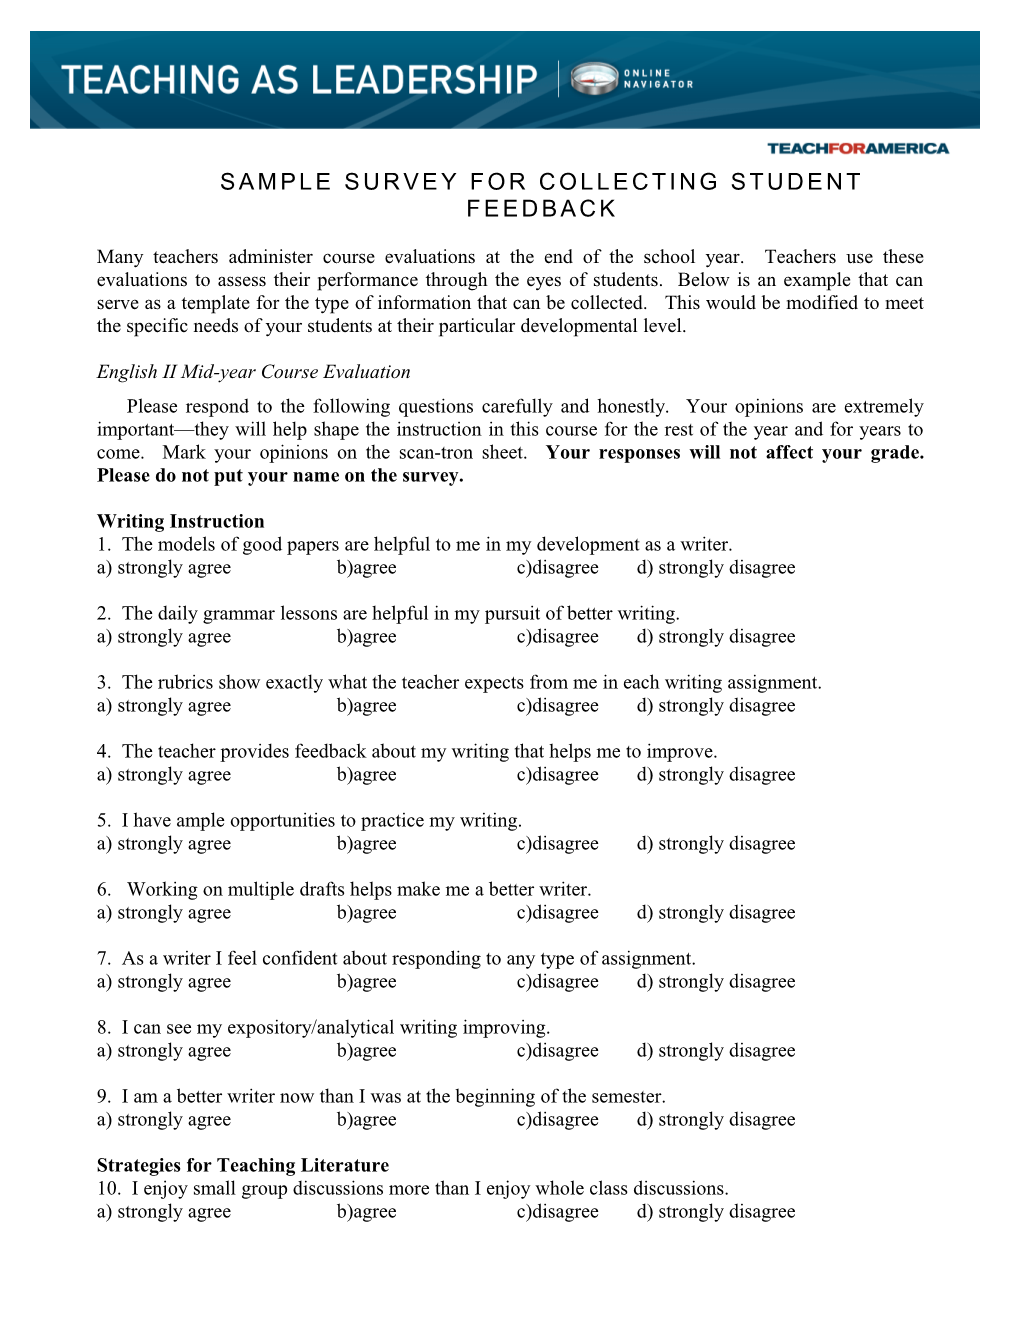 Sample Survey for Collecting Student Feedback